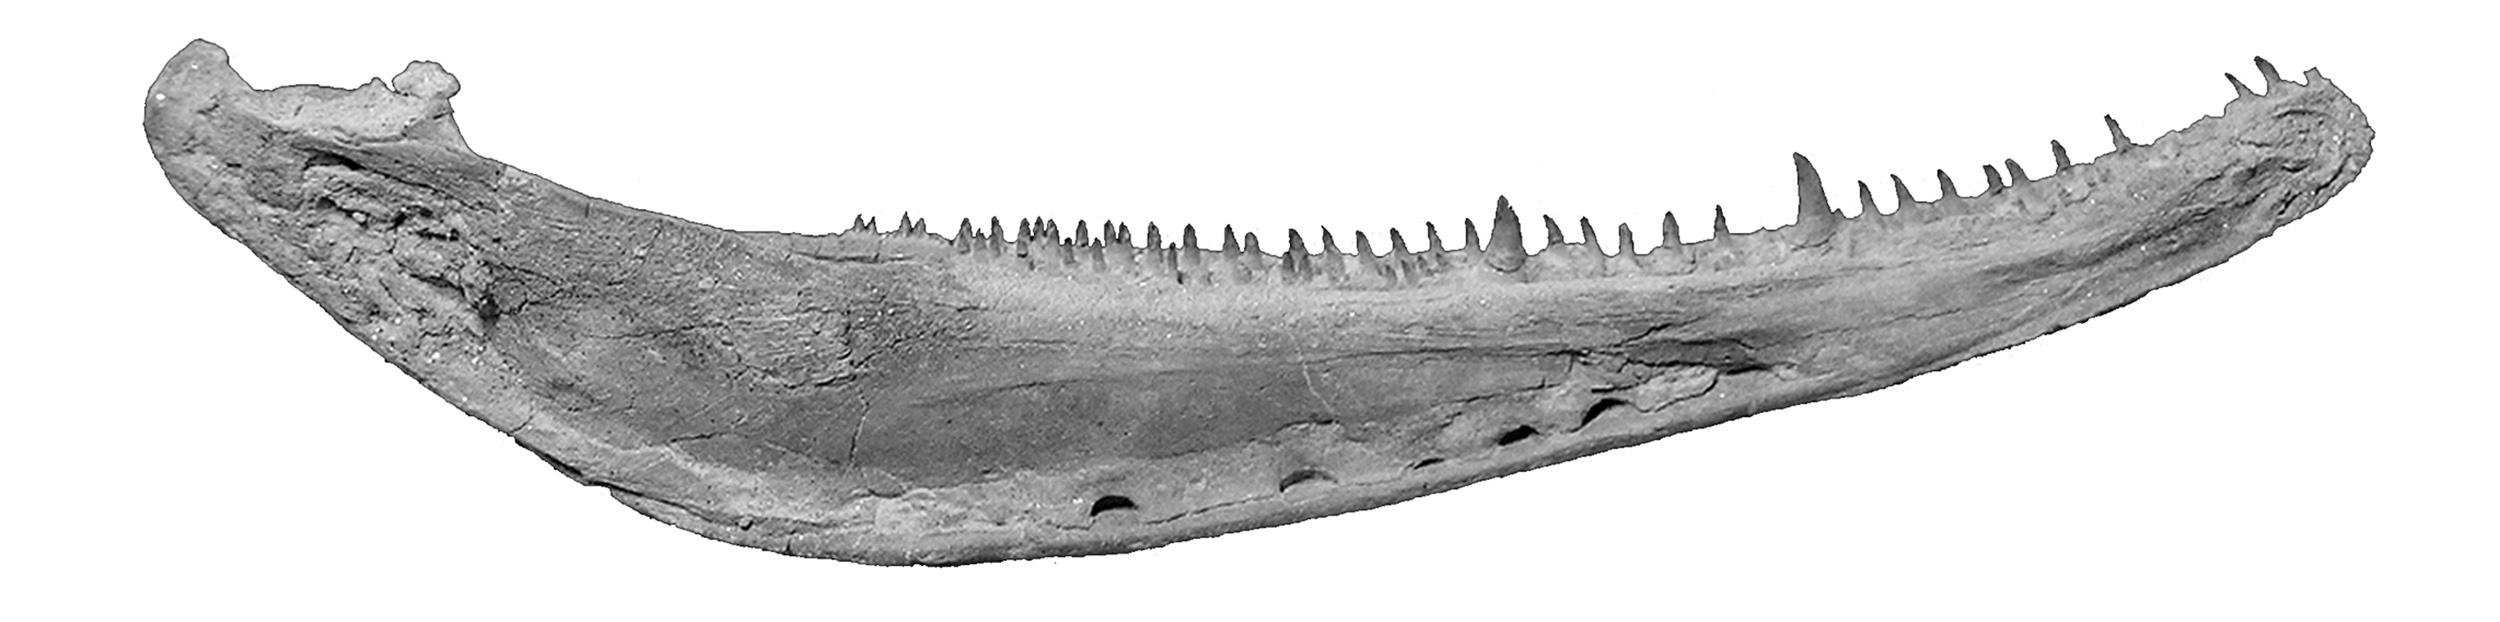 Latvian Fossils Close The Gap Between Fish And Land Animals, Say Researchers